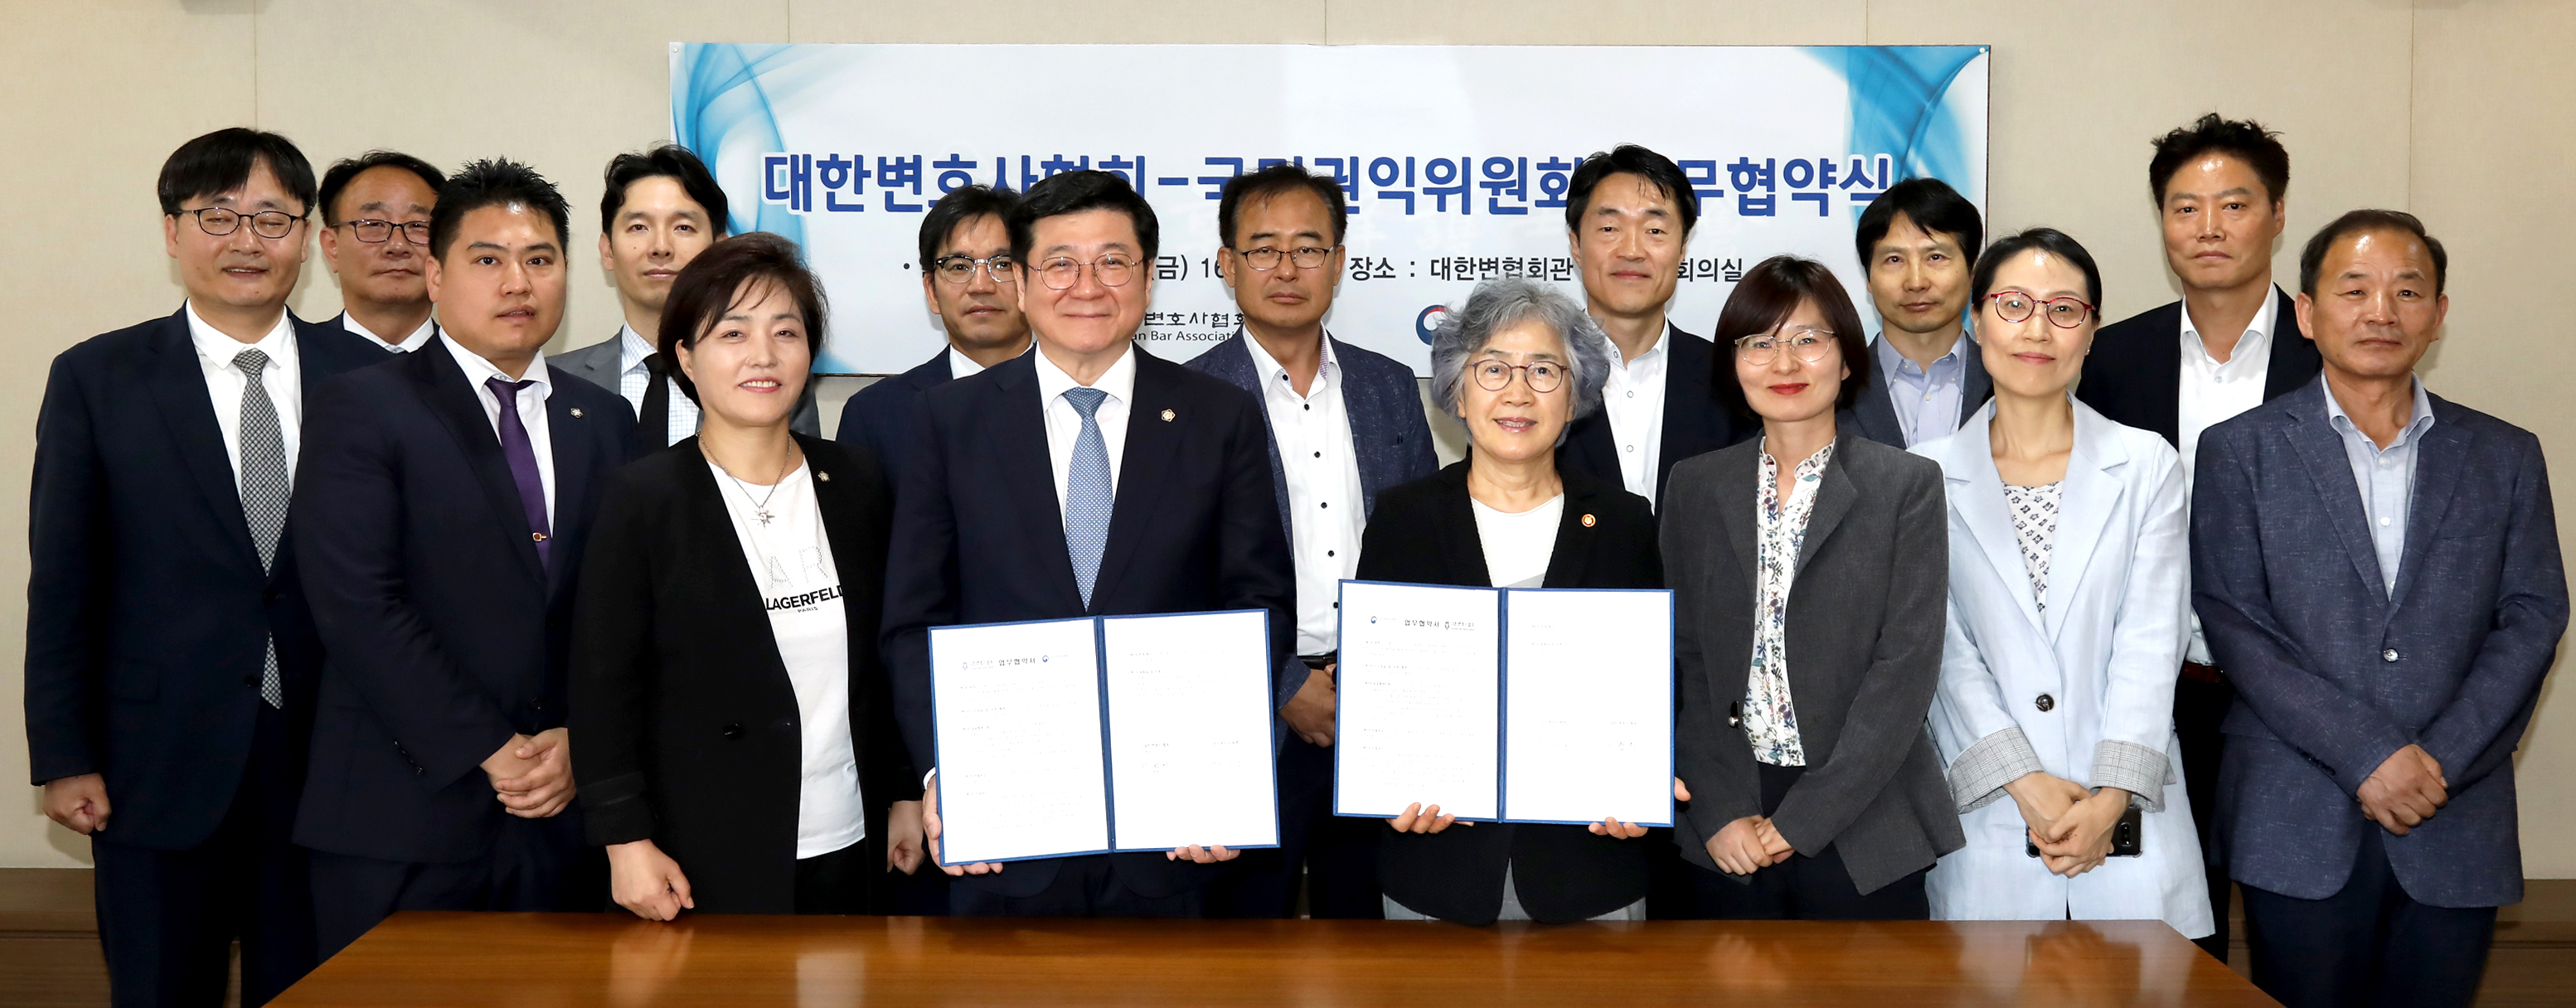 ACRC-KBA signed an MoU for ‘the facilitation of anonymous public interest reporting through advisory attorneys’ on May 31